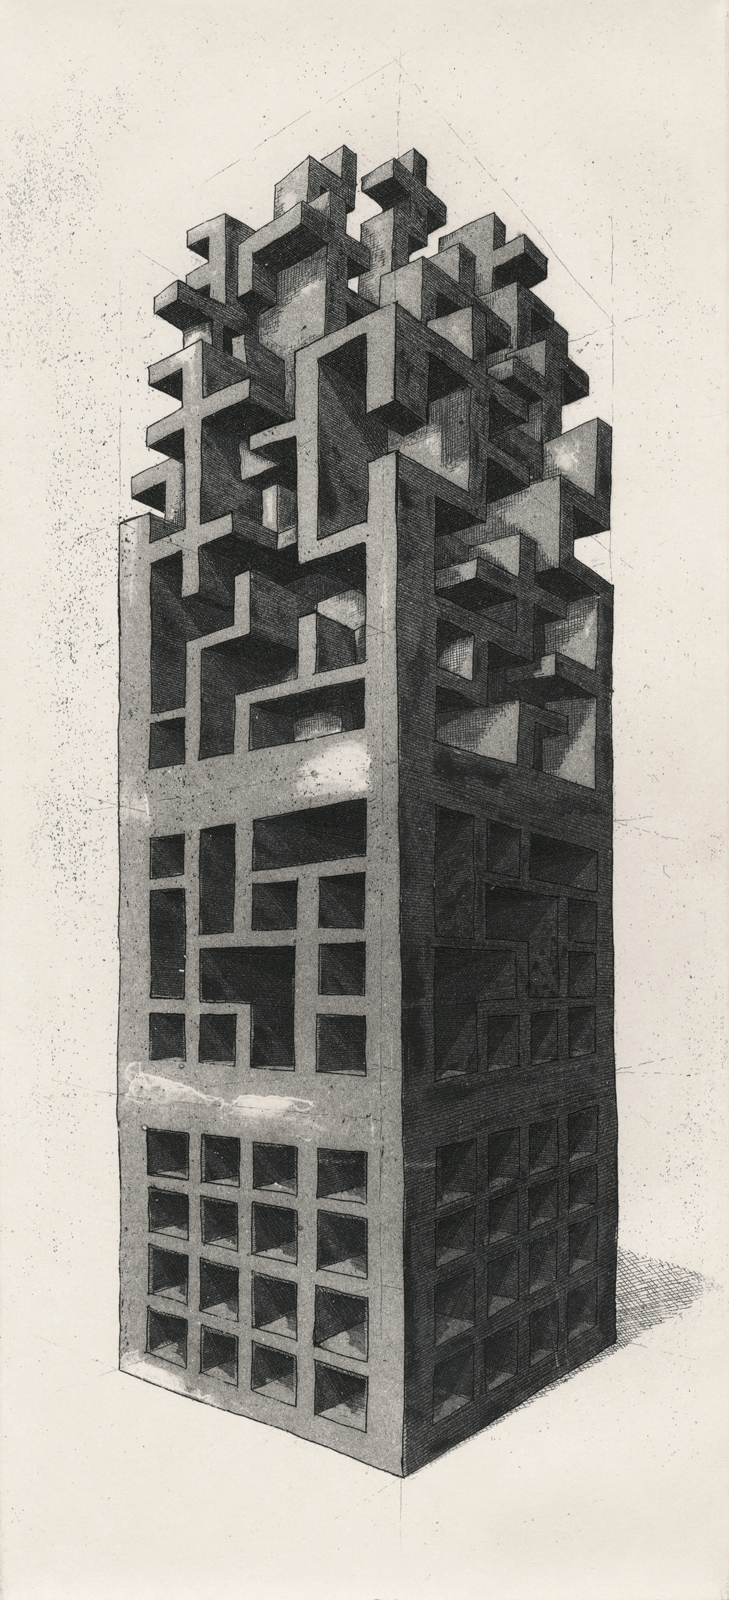 housing estate tower block geometry of living printmaking impossible figure illusion rubik's cube cage labirynth sketch etching aquatint council estate Impossible object